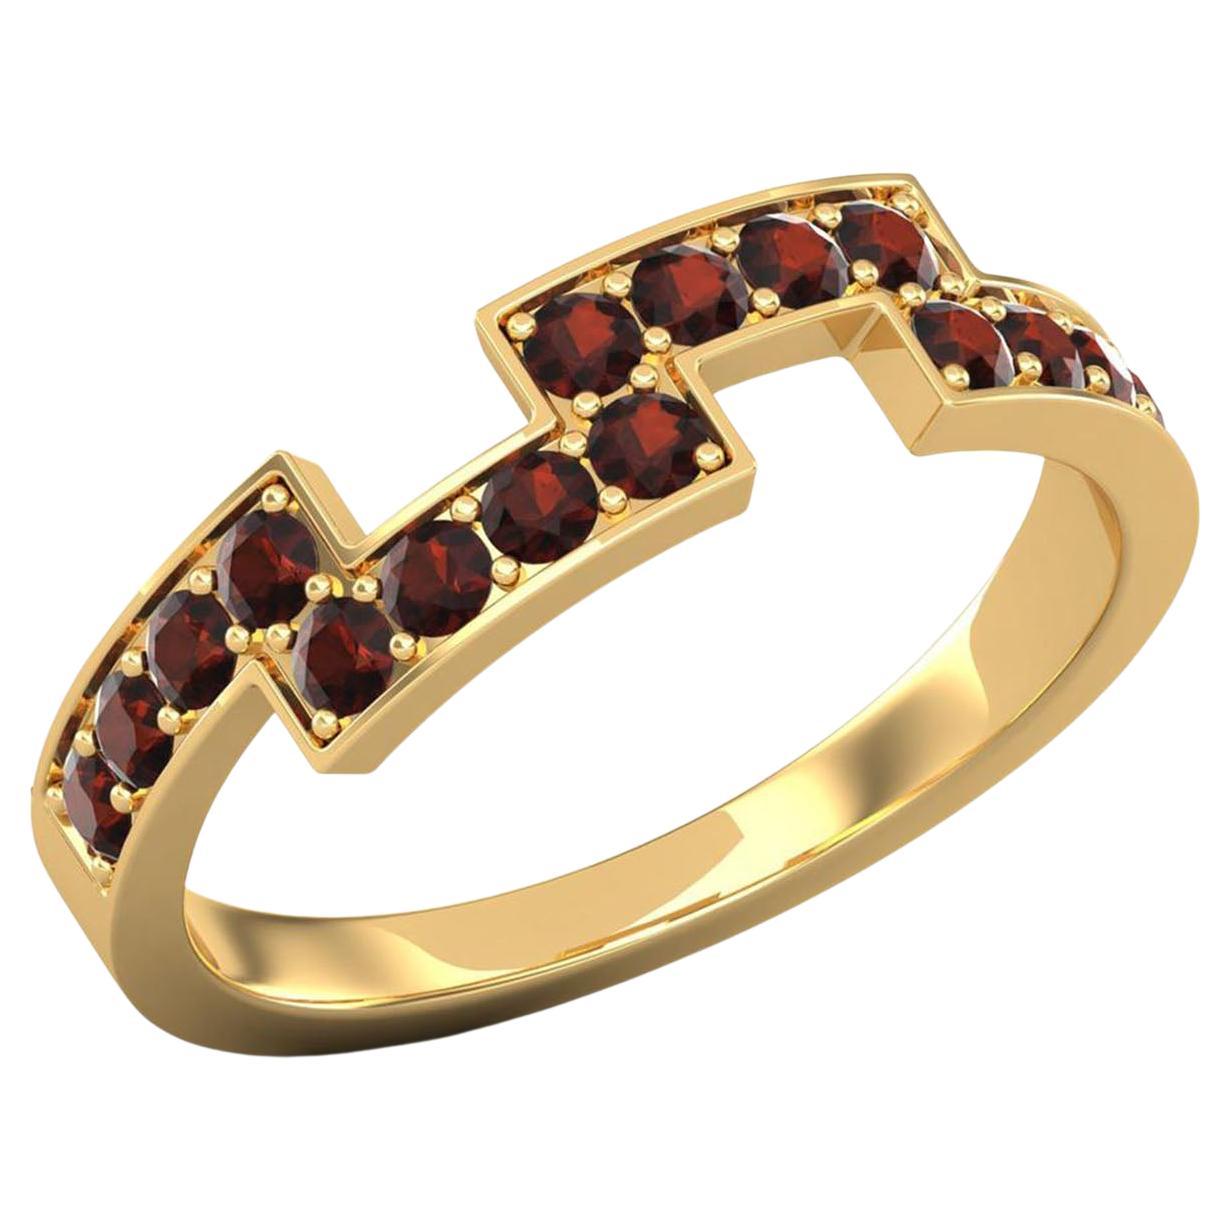 14 Karat Gold Red Garnet Ring / January Birthstone Ring Band / Ring for Her For Sale